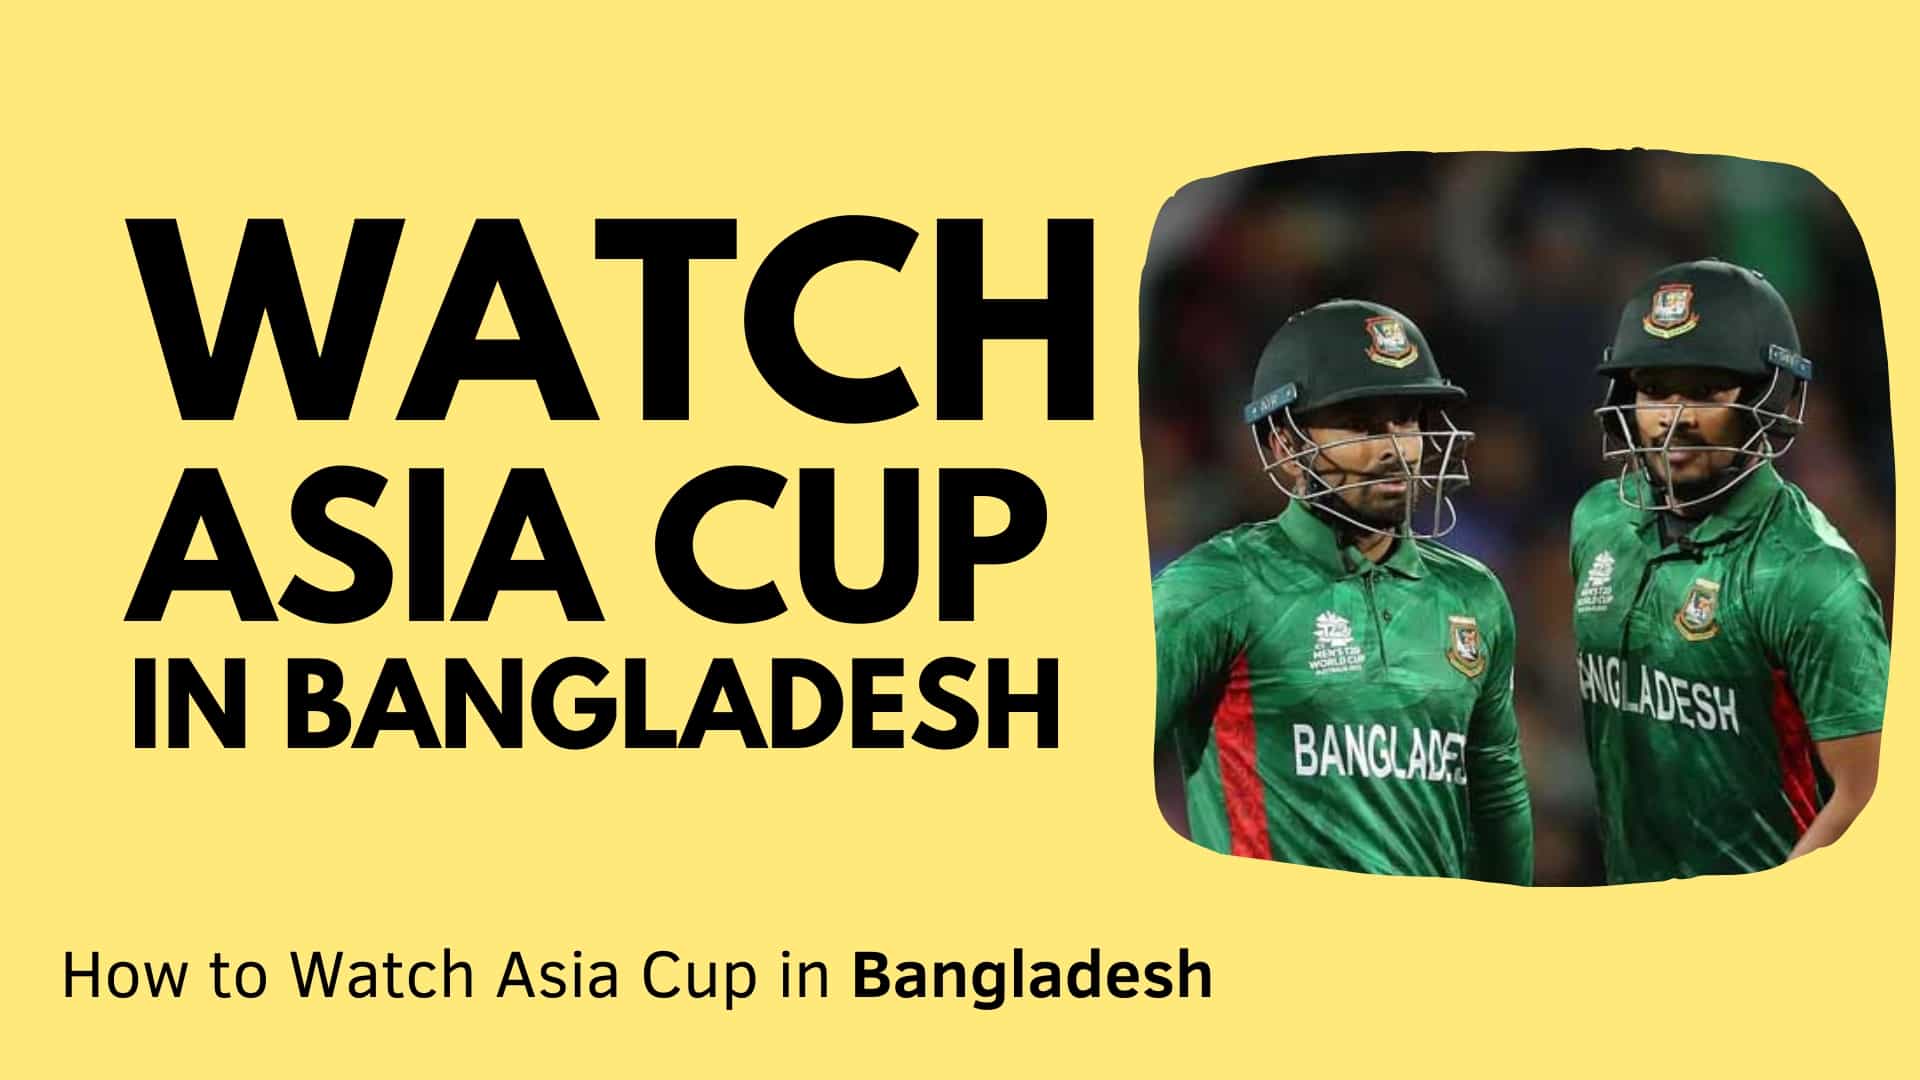 How to Watch Asia Cup Live Matches in Bangladesh